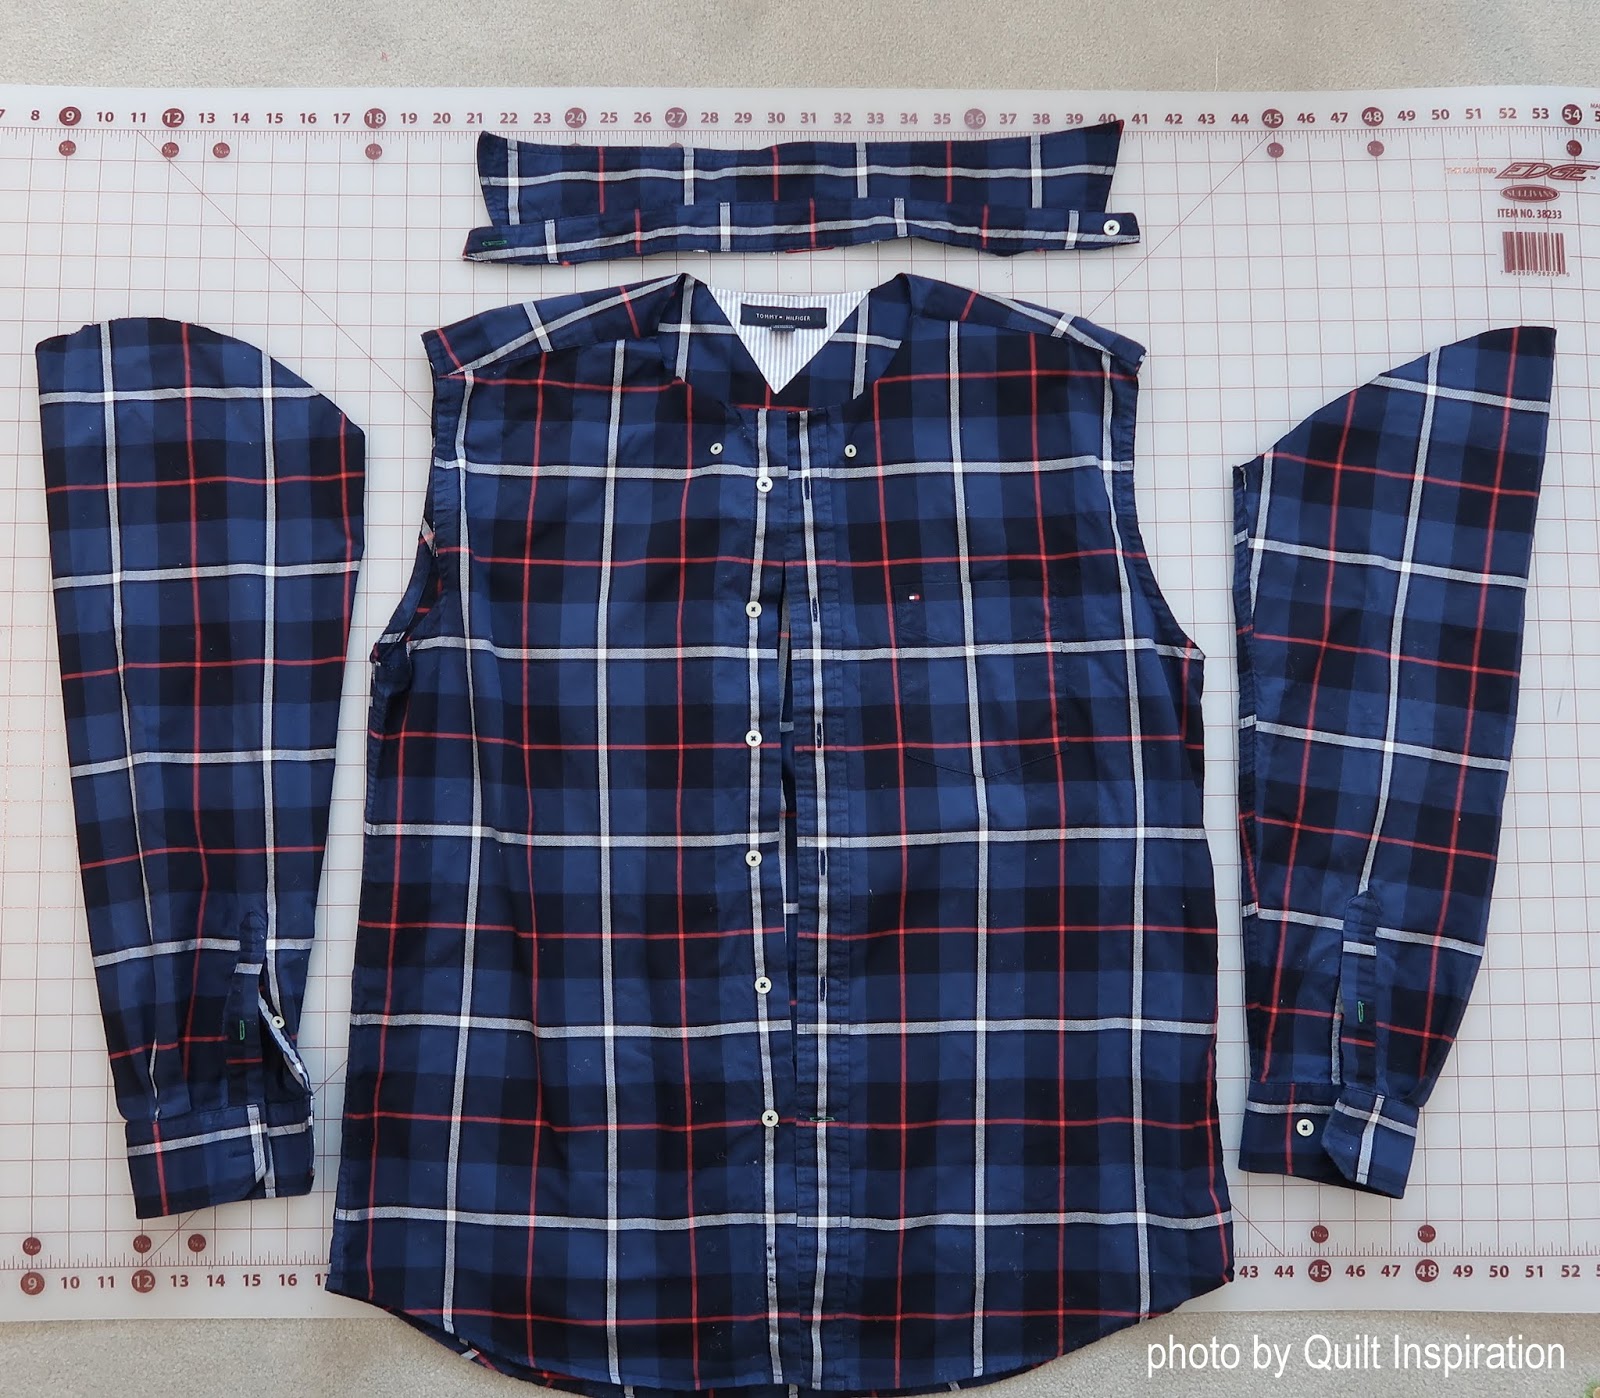 Quilt Inspiration: Checks and Plaids Quilt from 6 Shirts : A